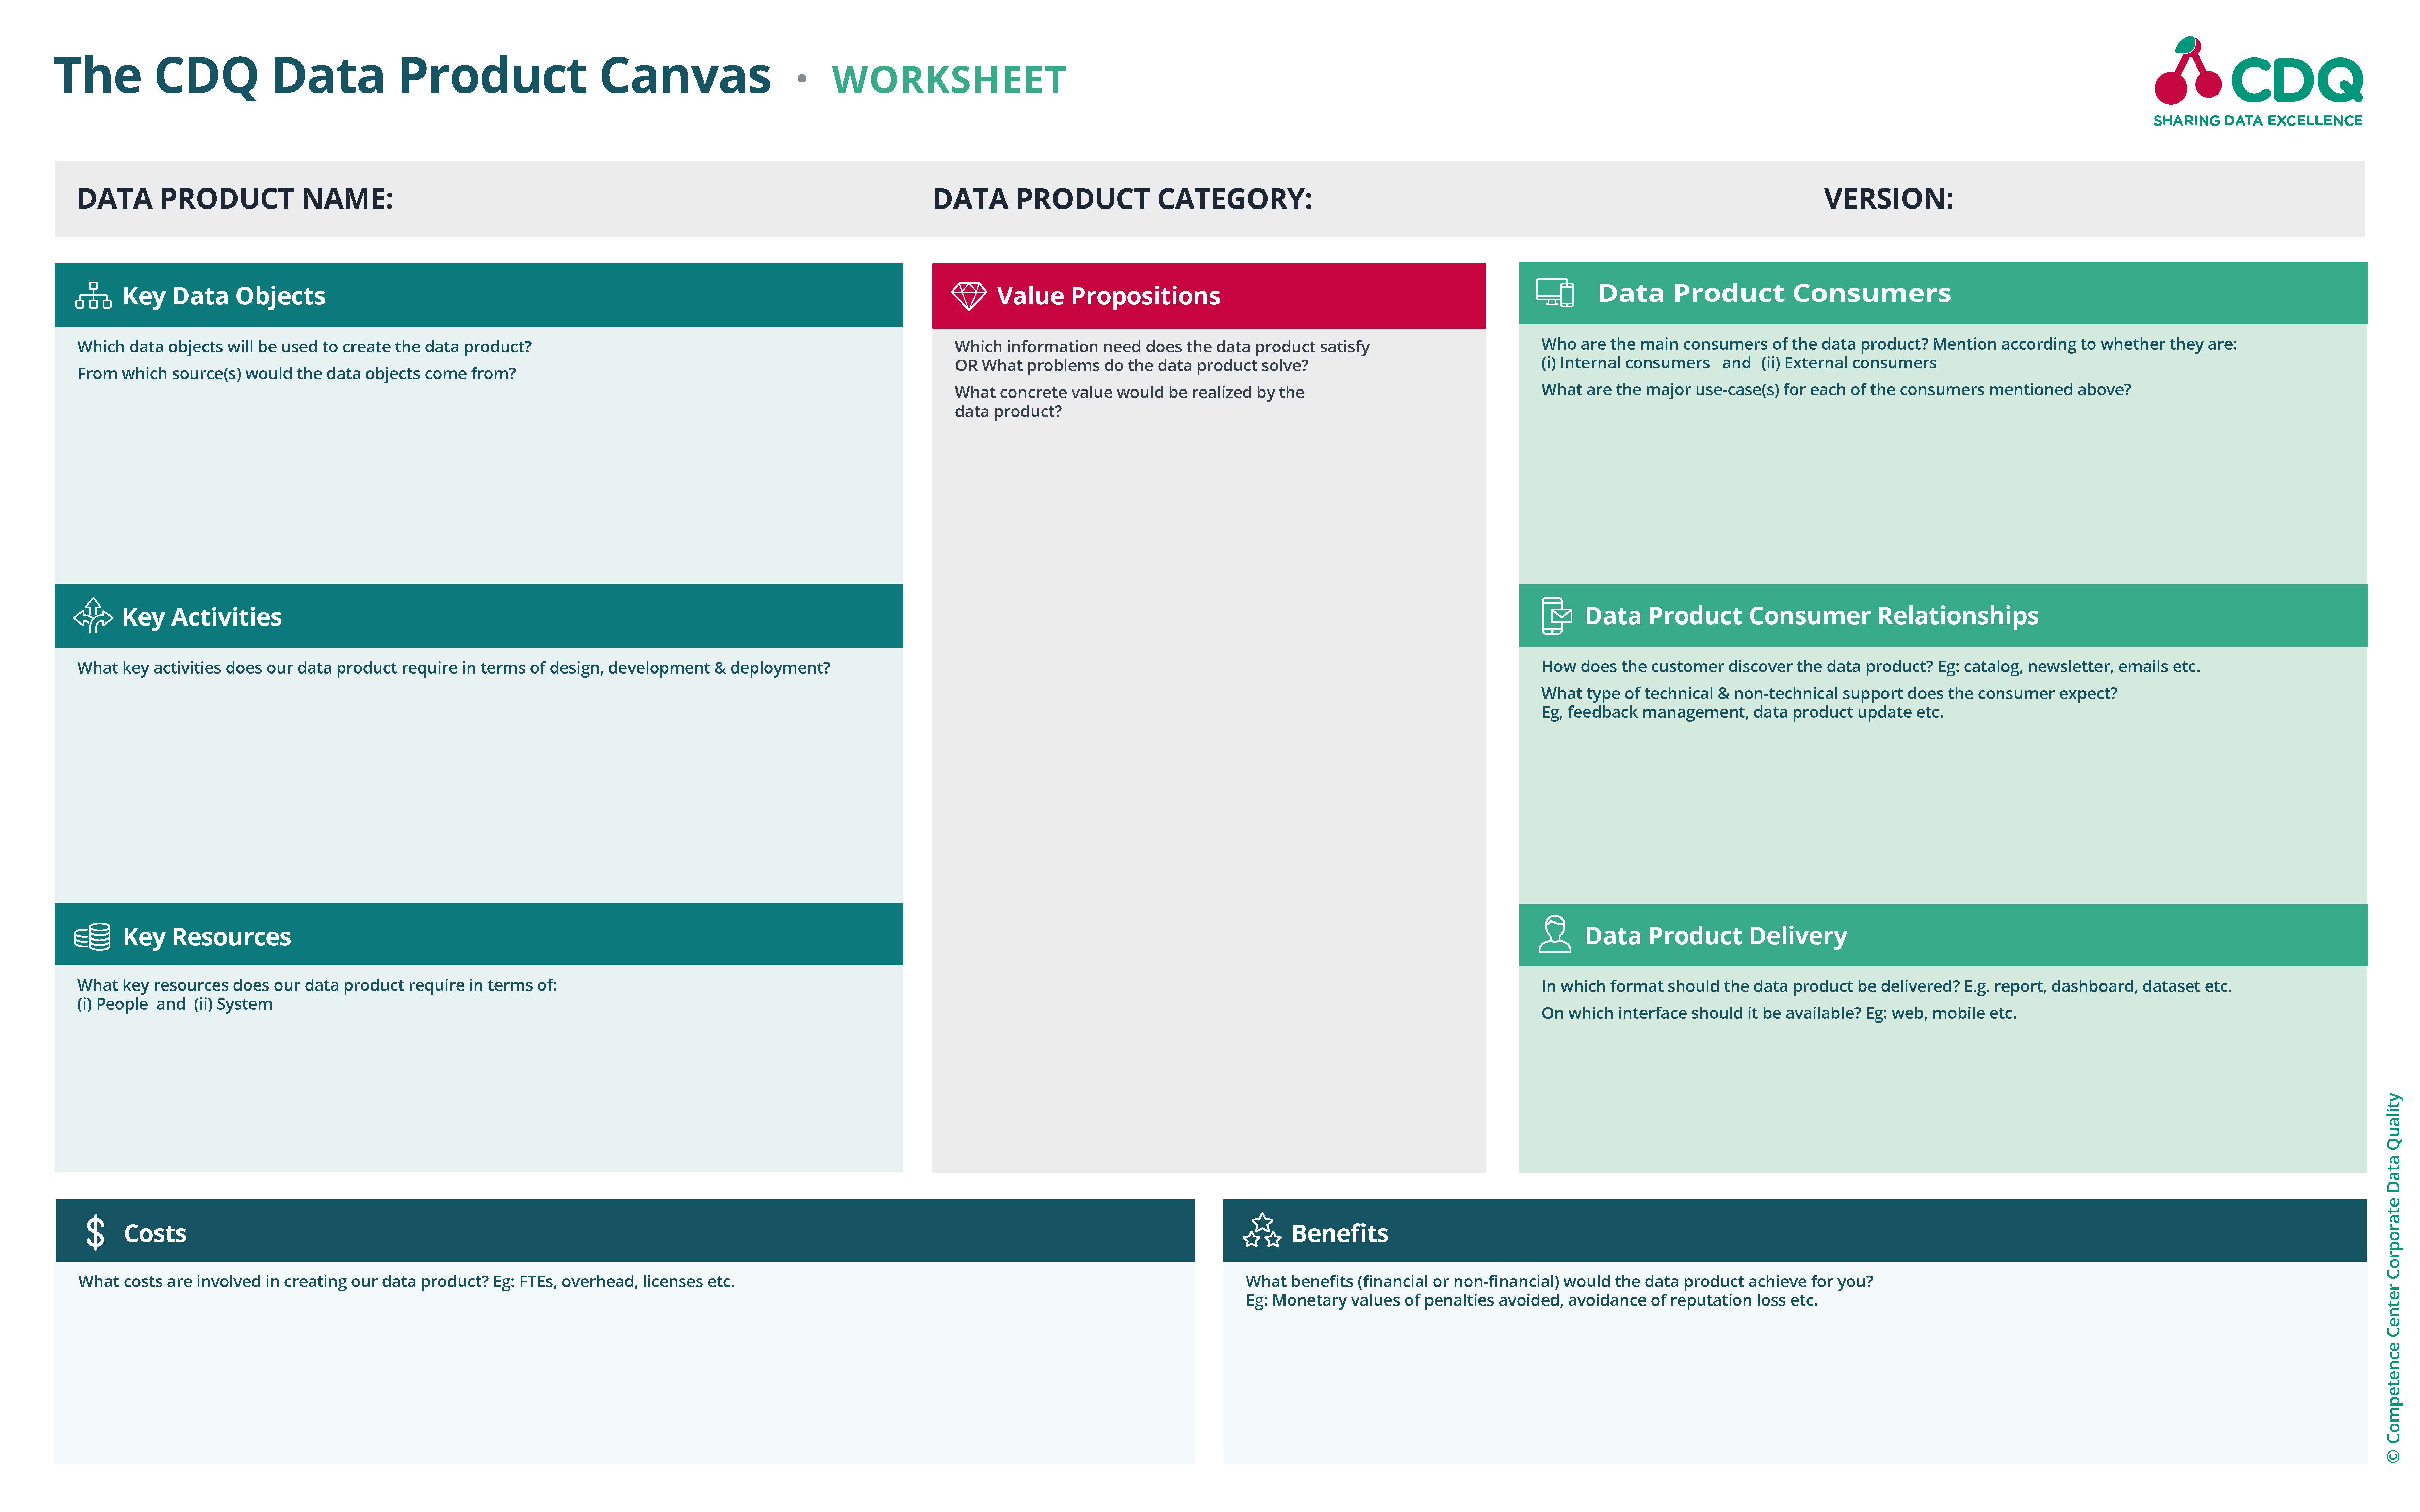 CC CDQ-Data-Product-Canvas